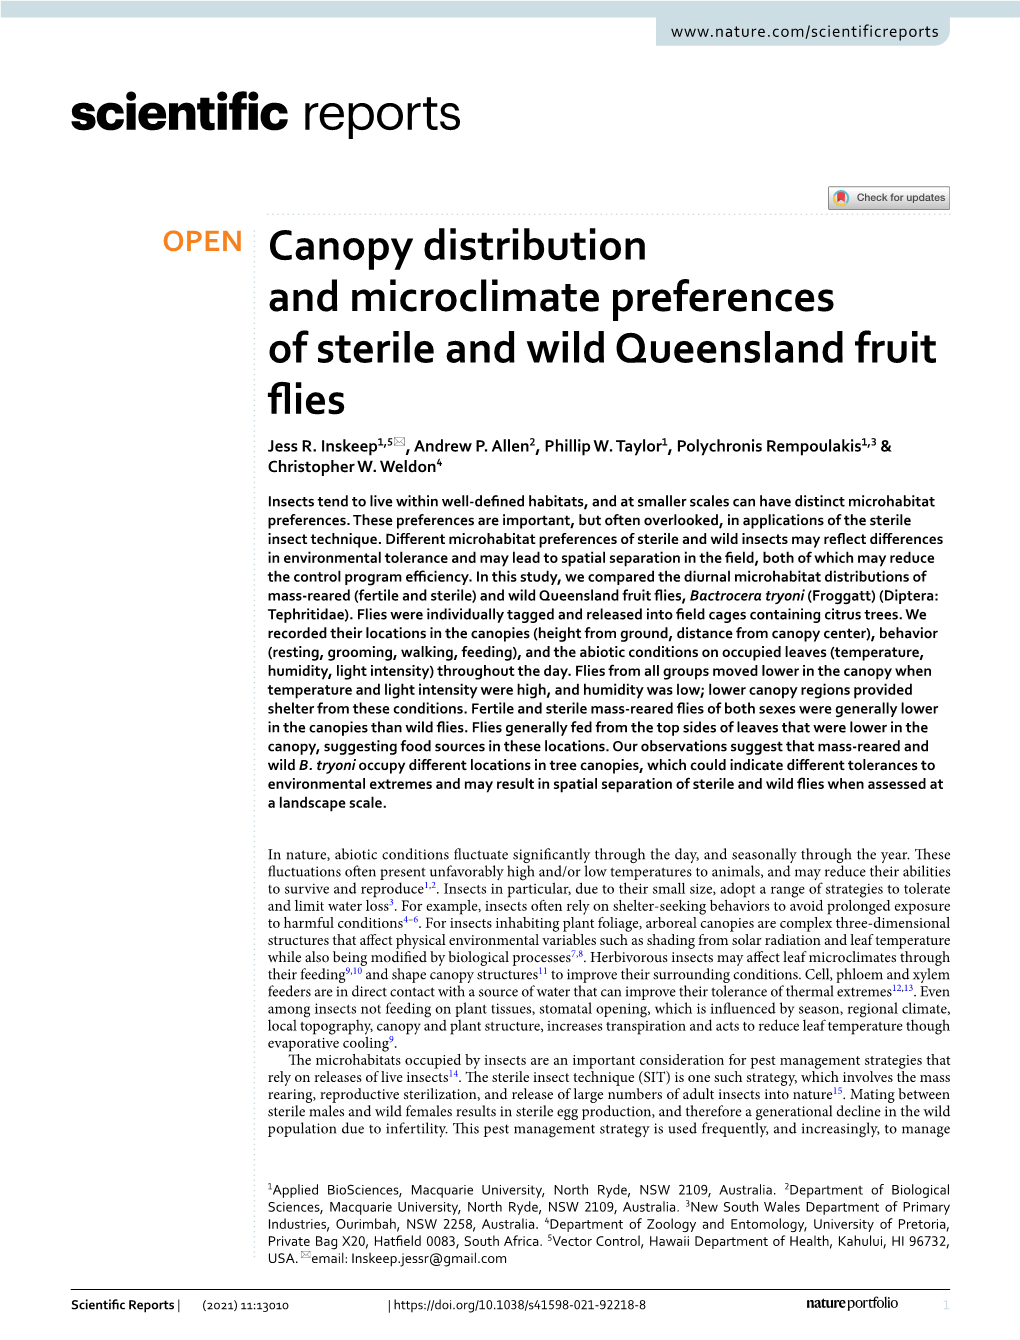 Canopy Distribution and Microclimate Preferences of Sterile and Wild Queensland Fruit Fies Jess R